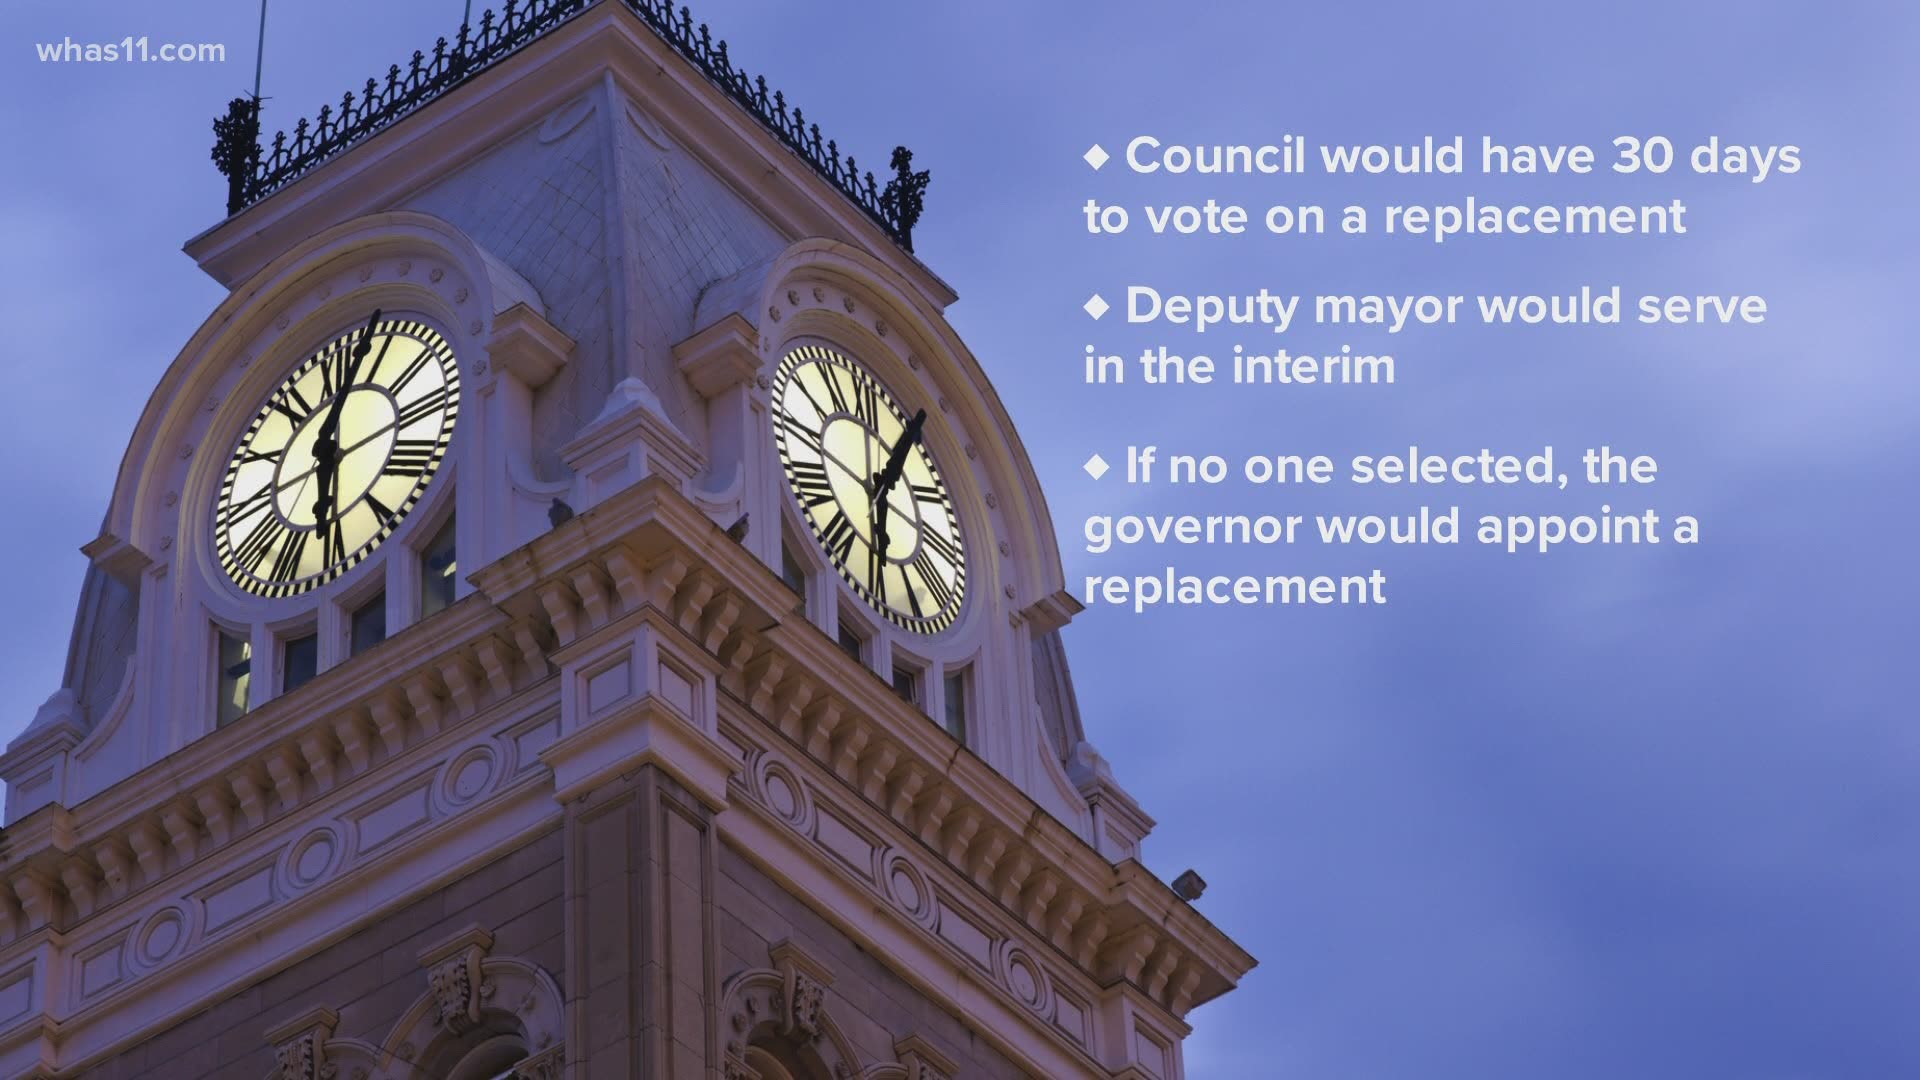 If the Mayor Greg Fischer did resign, which he's said he won't do, who would take his place?